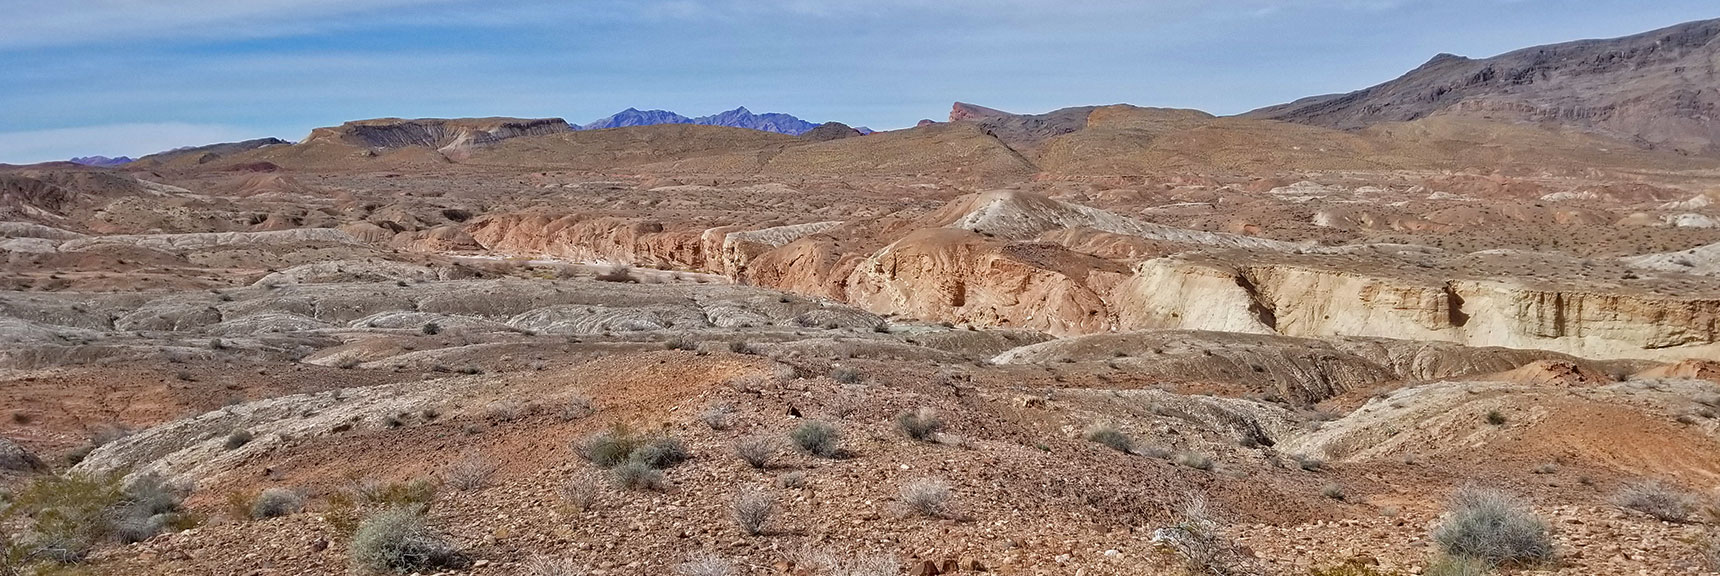 Muddy Mountains and Echo Wash Badlands Area from About Mile 34 On Northshore Road in Lake Mead National Park, Nevada